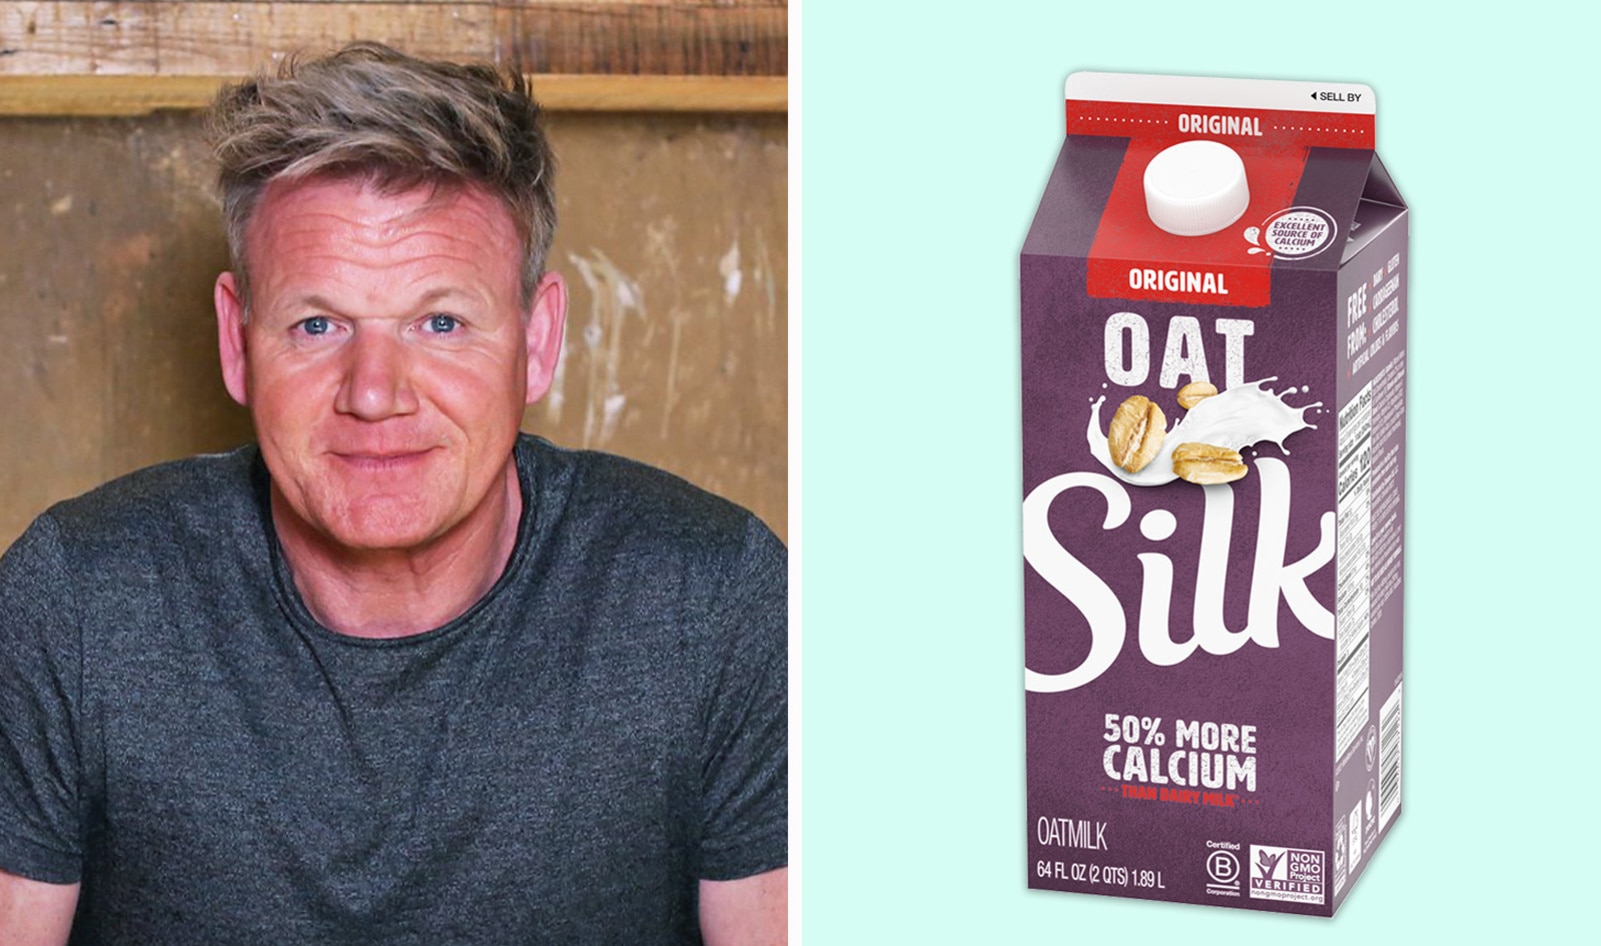 Gordon Ramsay Is Face of New Vegan Oat Milk Campaign: “I Really Enjoy Cooking More Plant-Based Dishes”